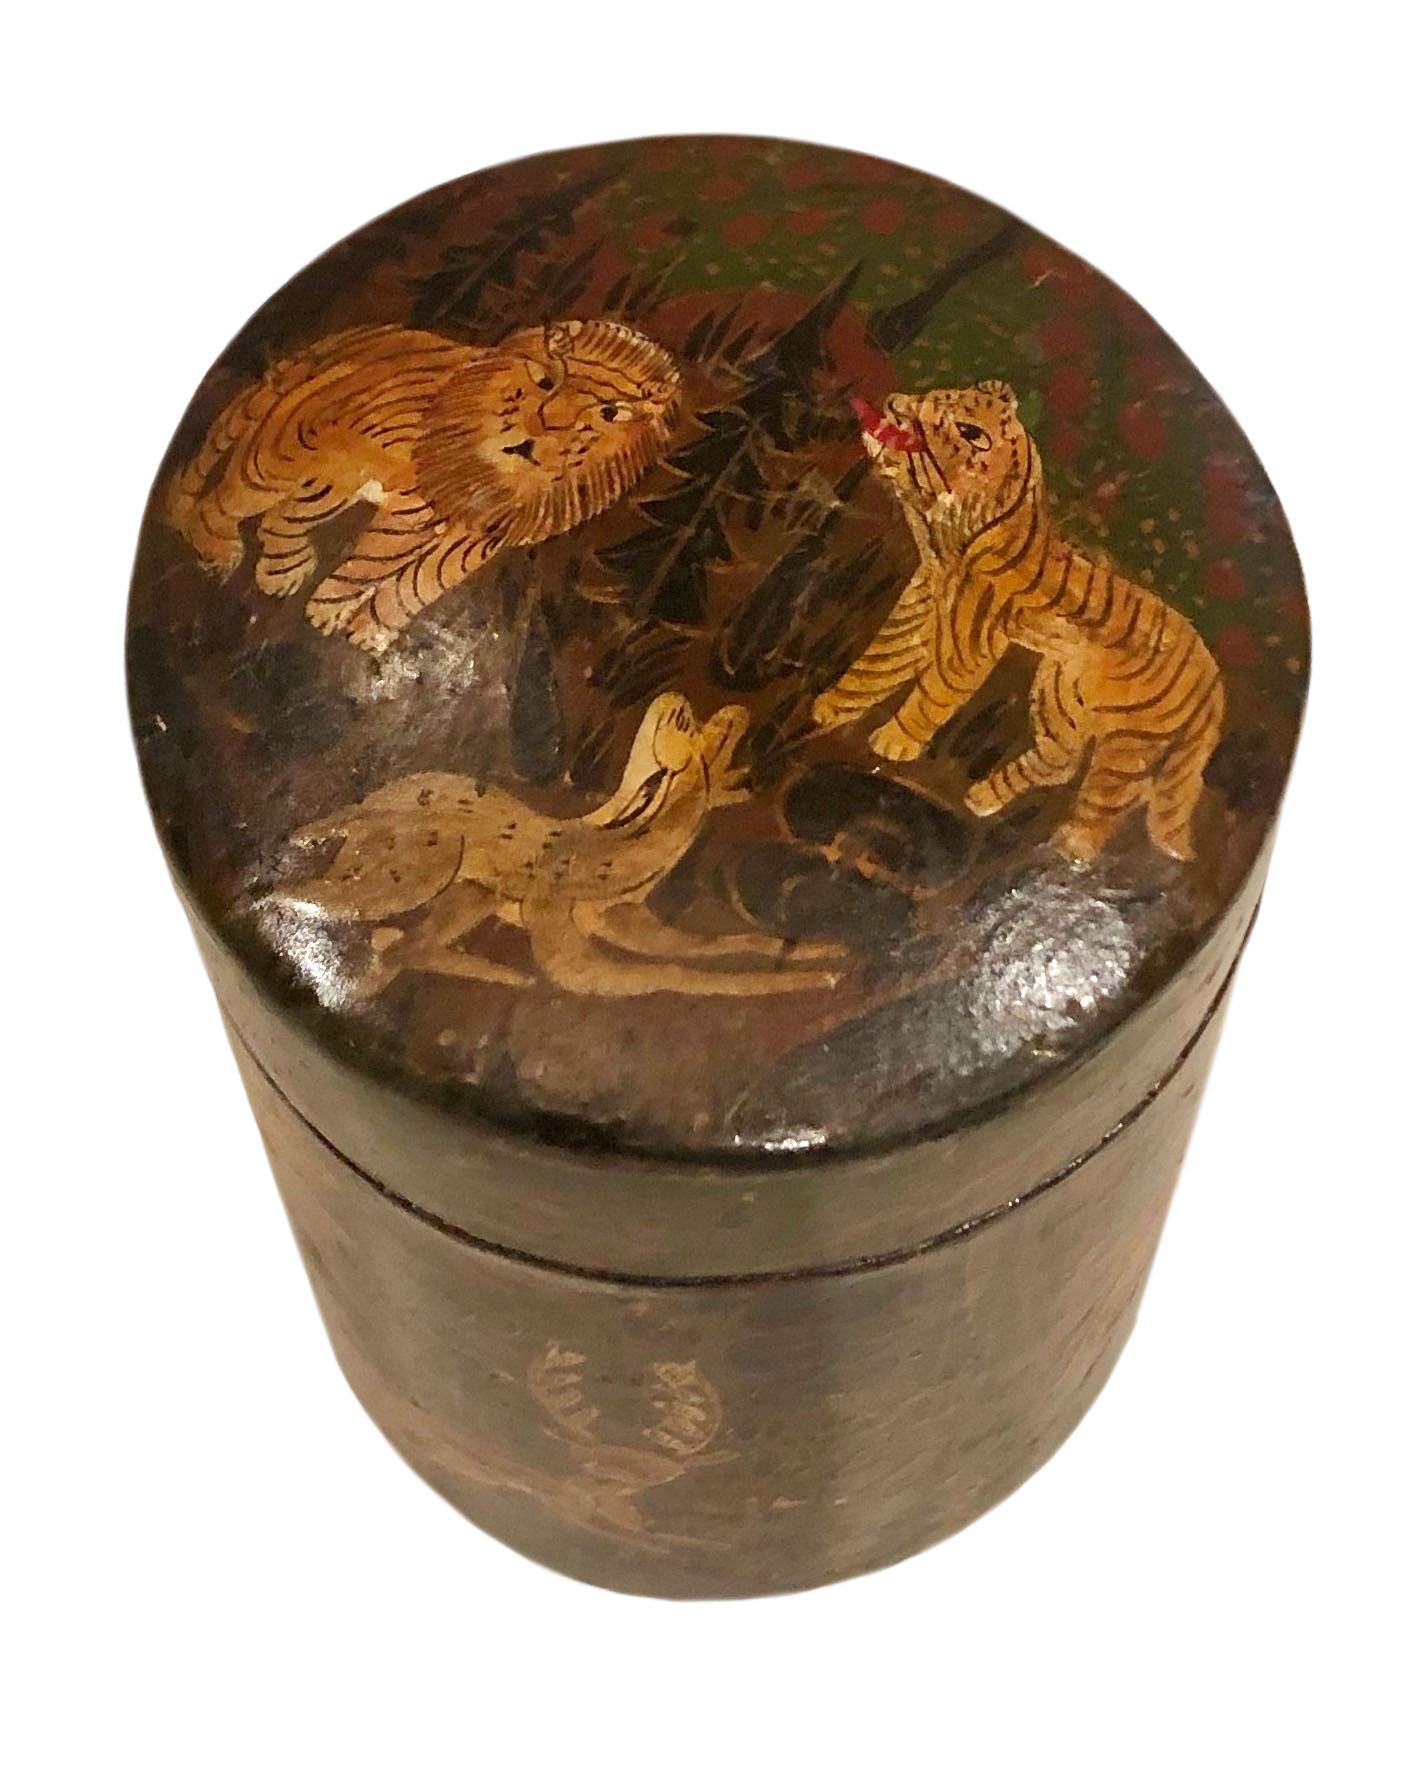 An attractive 1920s papier mâché cylinder box hand painted with animals, lions, tigers, deer or antelope. Very beautifully painted and whimsical The bottom has an old paper label on it could be the company. From Kashmir, India.